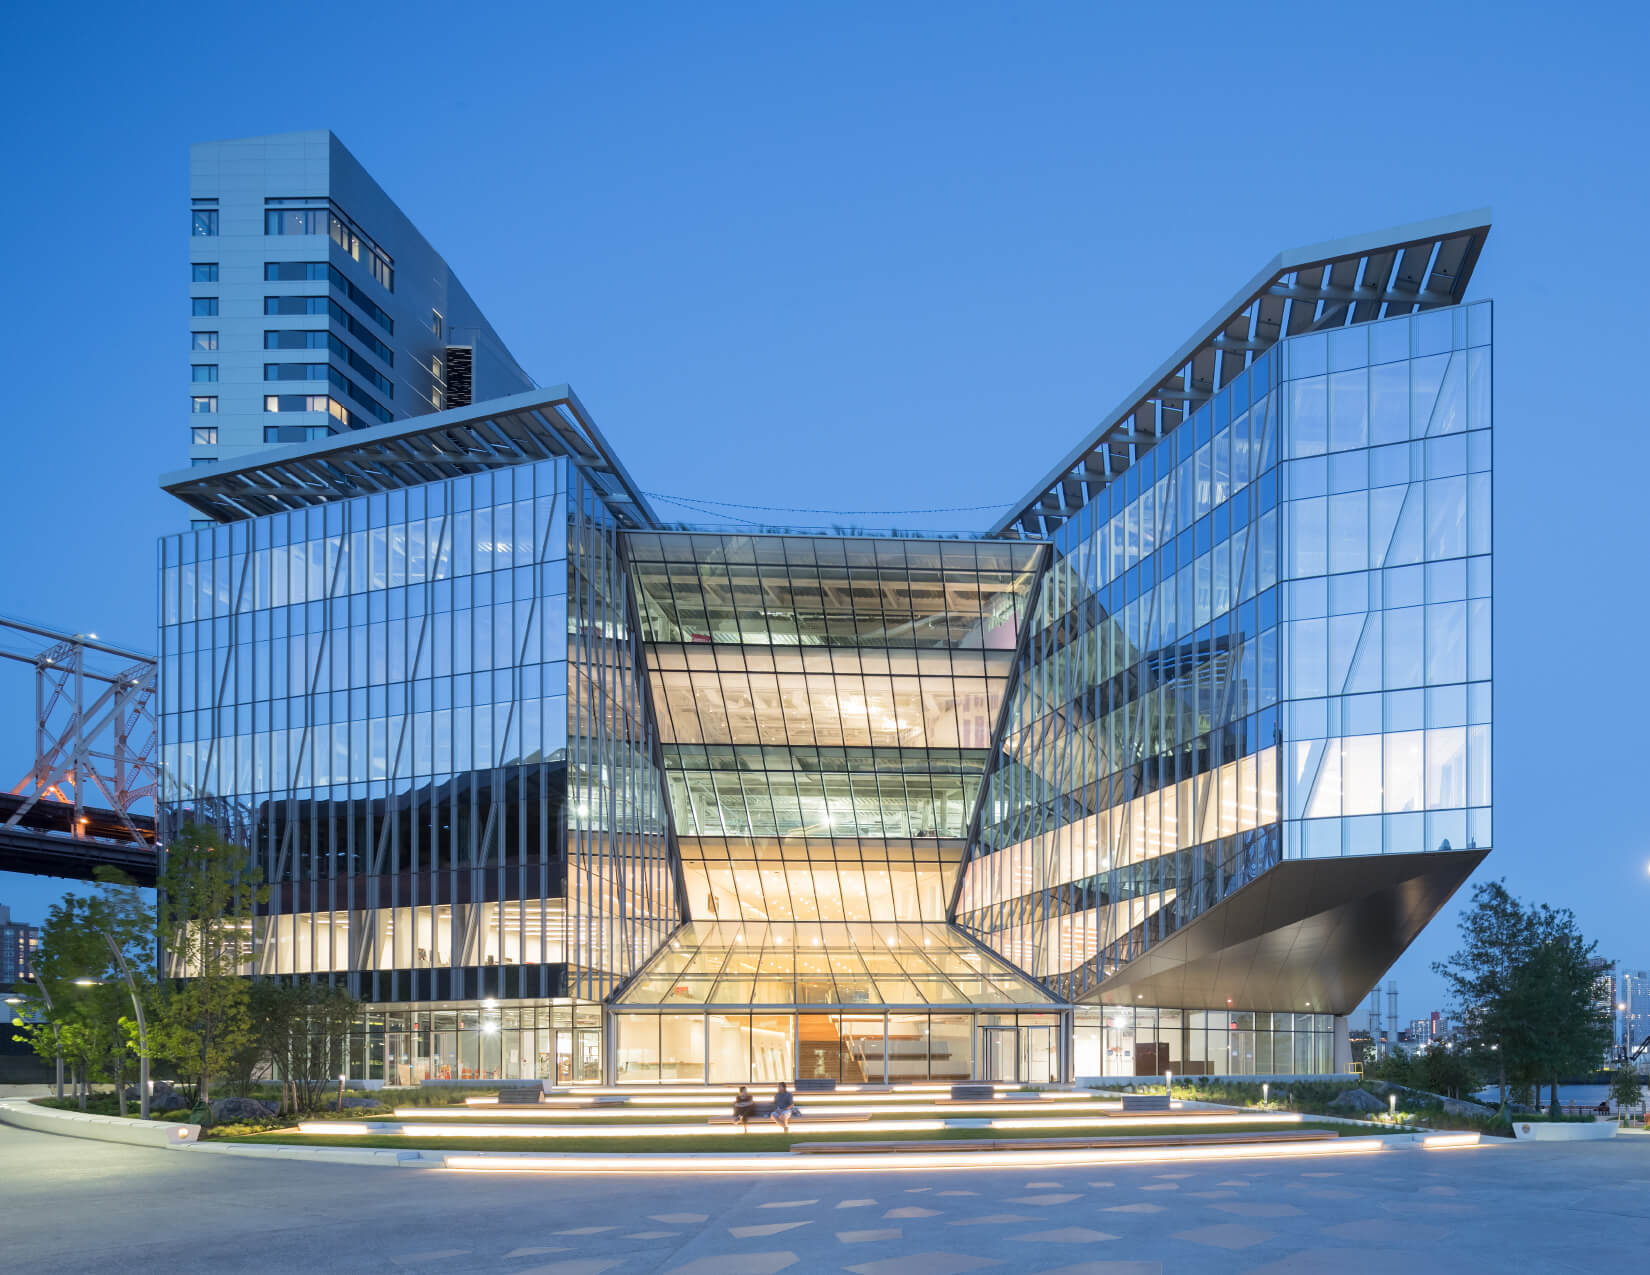 photograph depicting the exterior of a contemporary glass office building at dusk